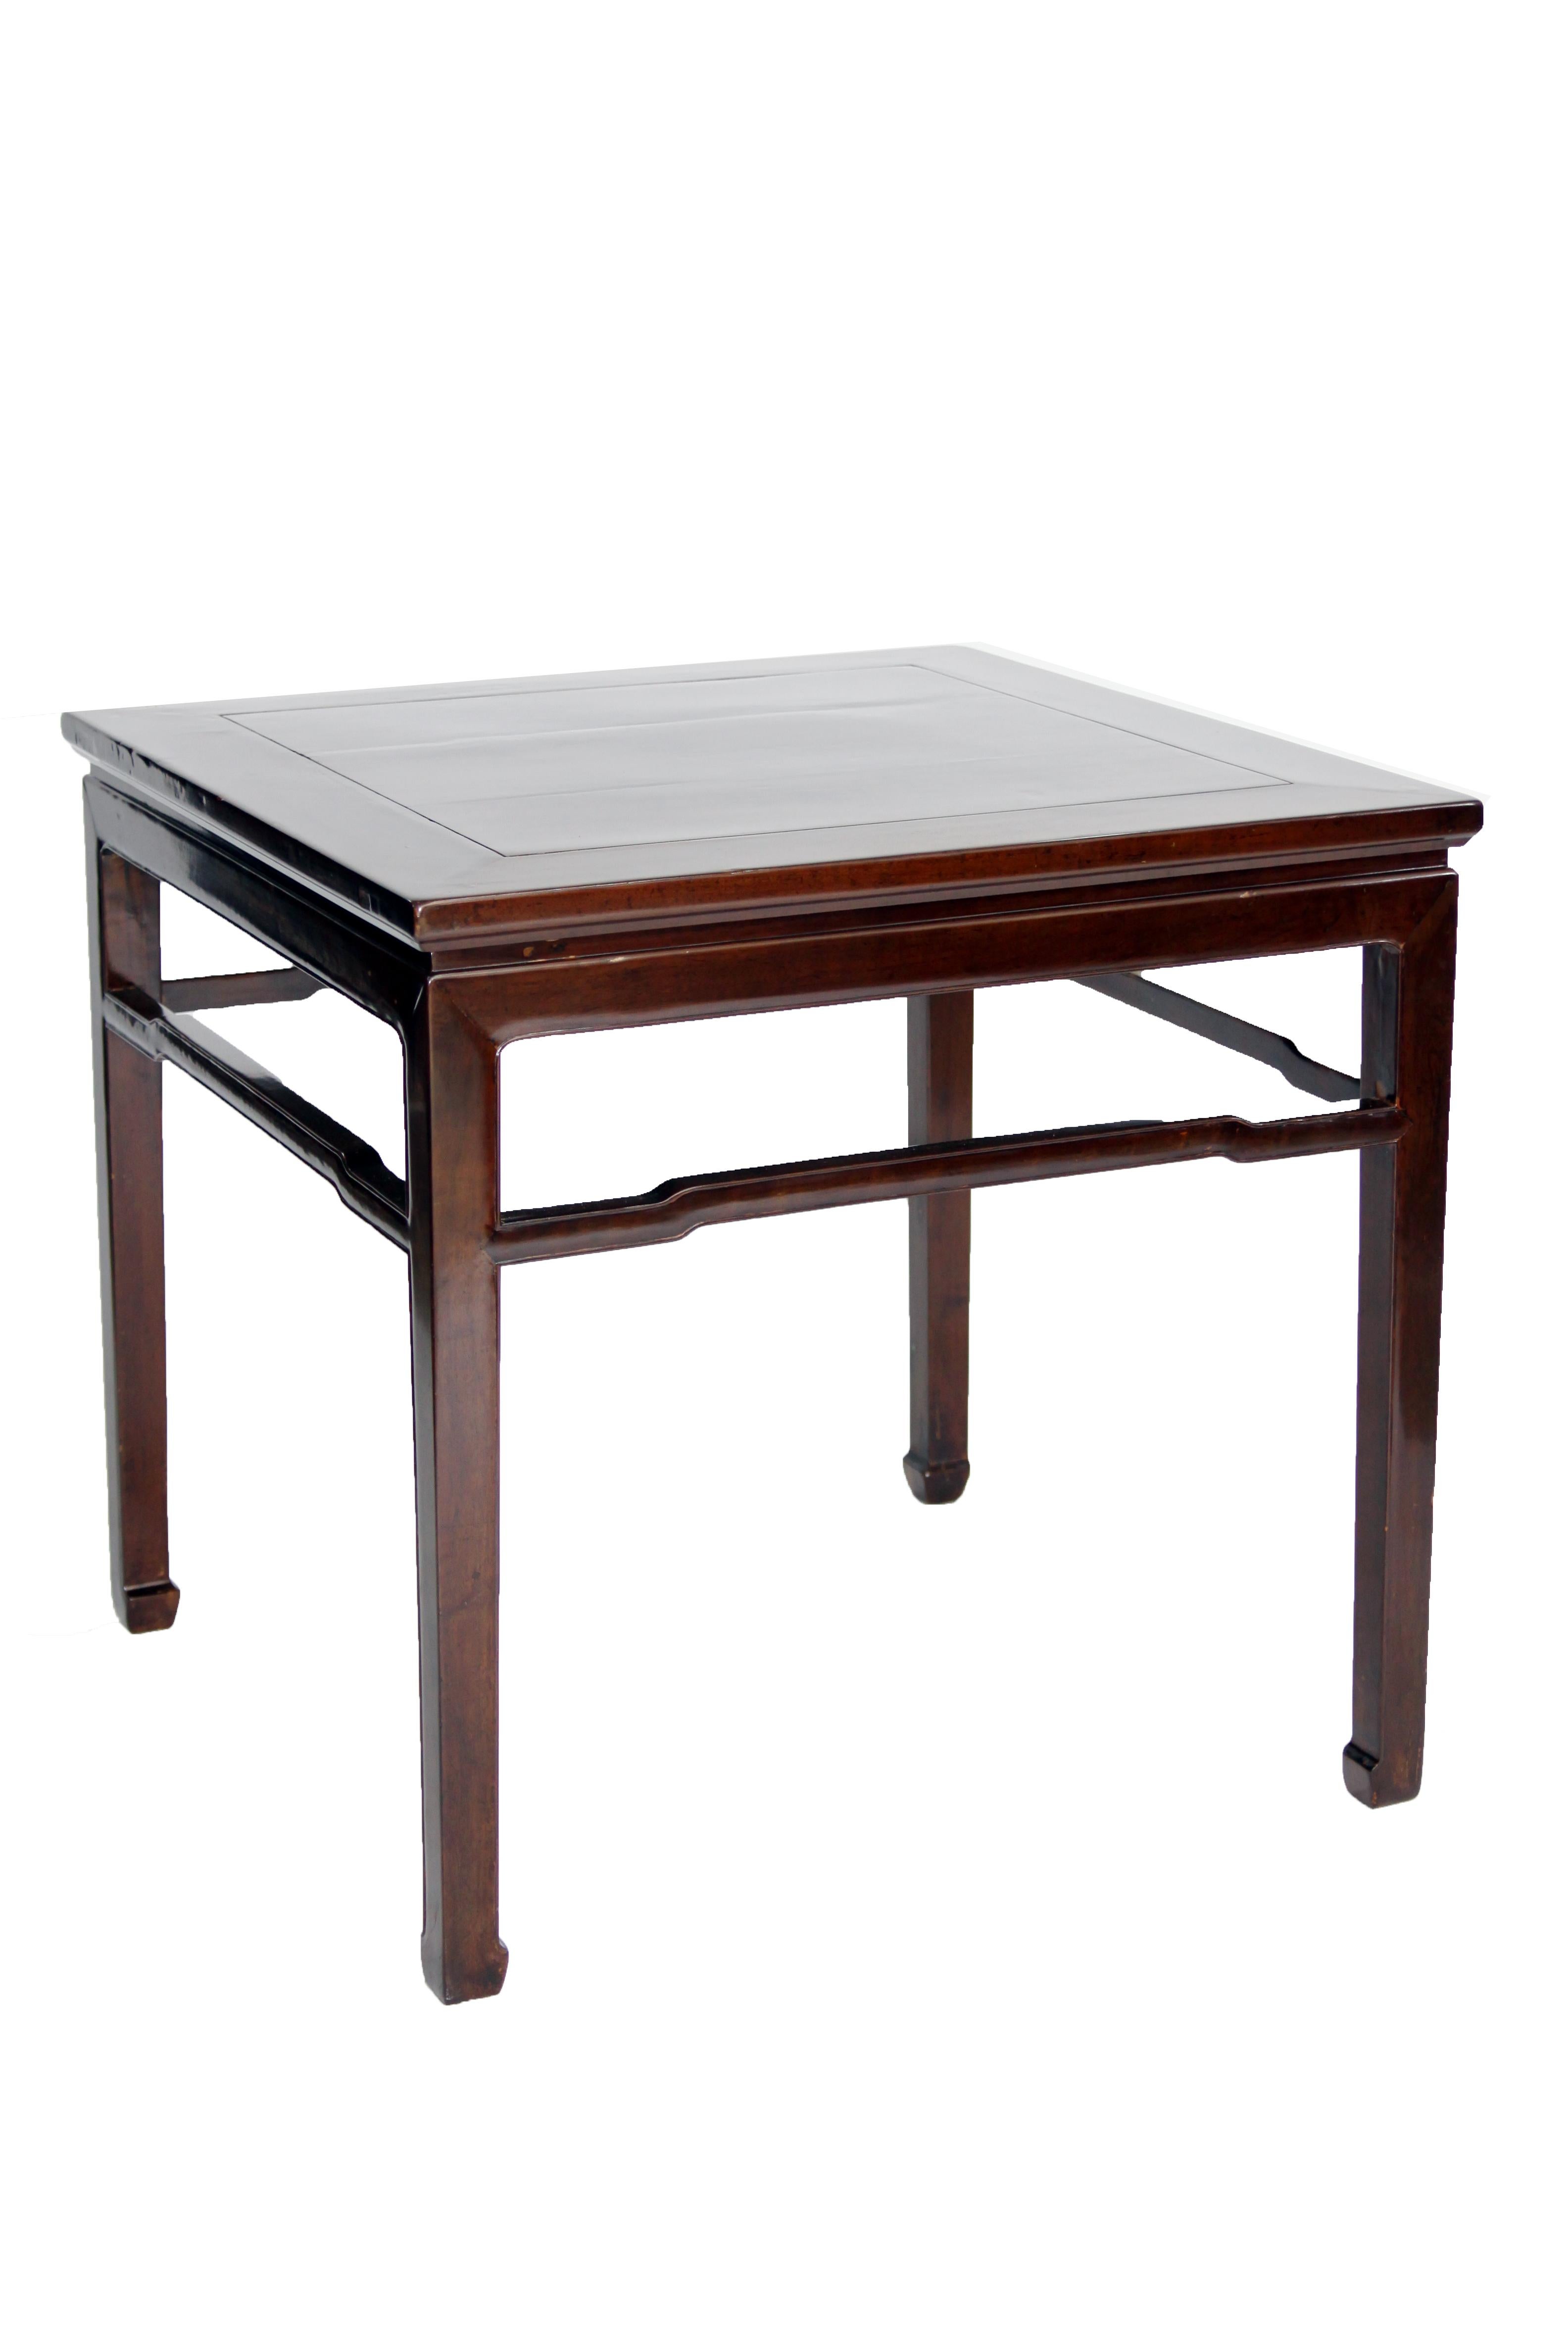 Ming Antique Chinese Walnut Square Table with Humpback Stretchers & Horse Hoof Feet For Sale